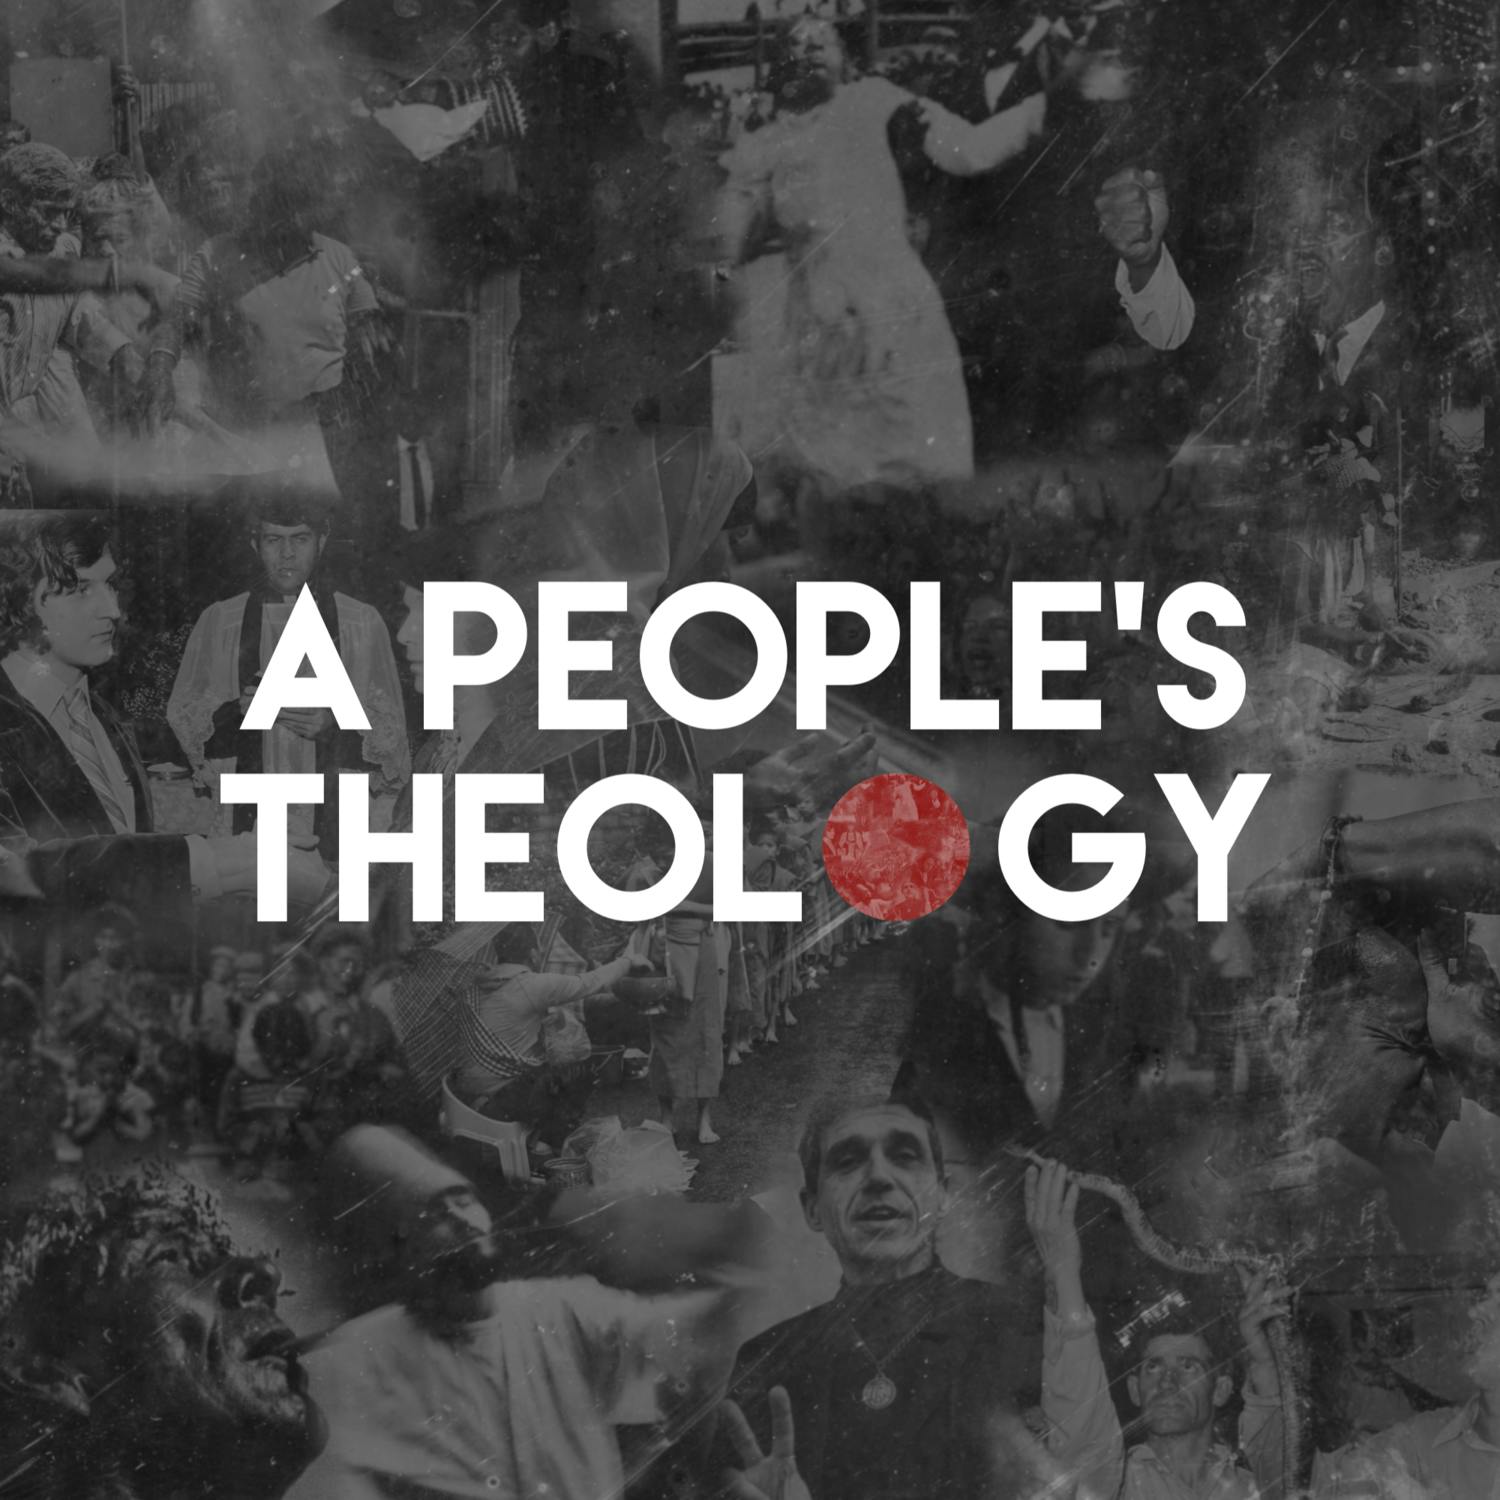 Alicia Crosby: How Can Theology Change the World?